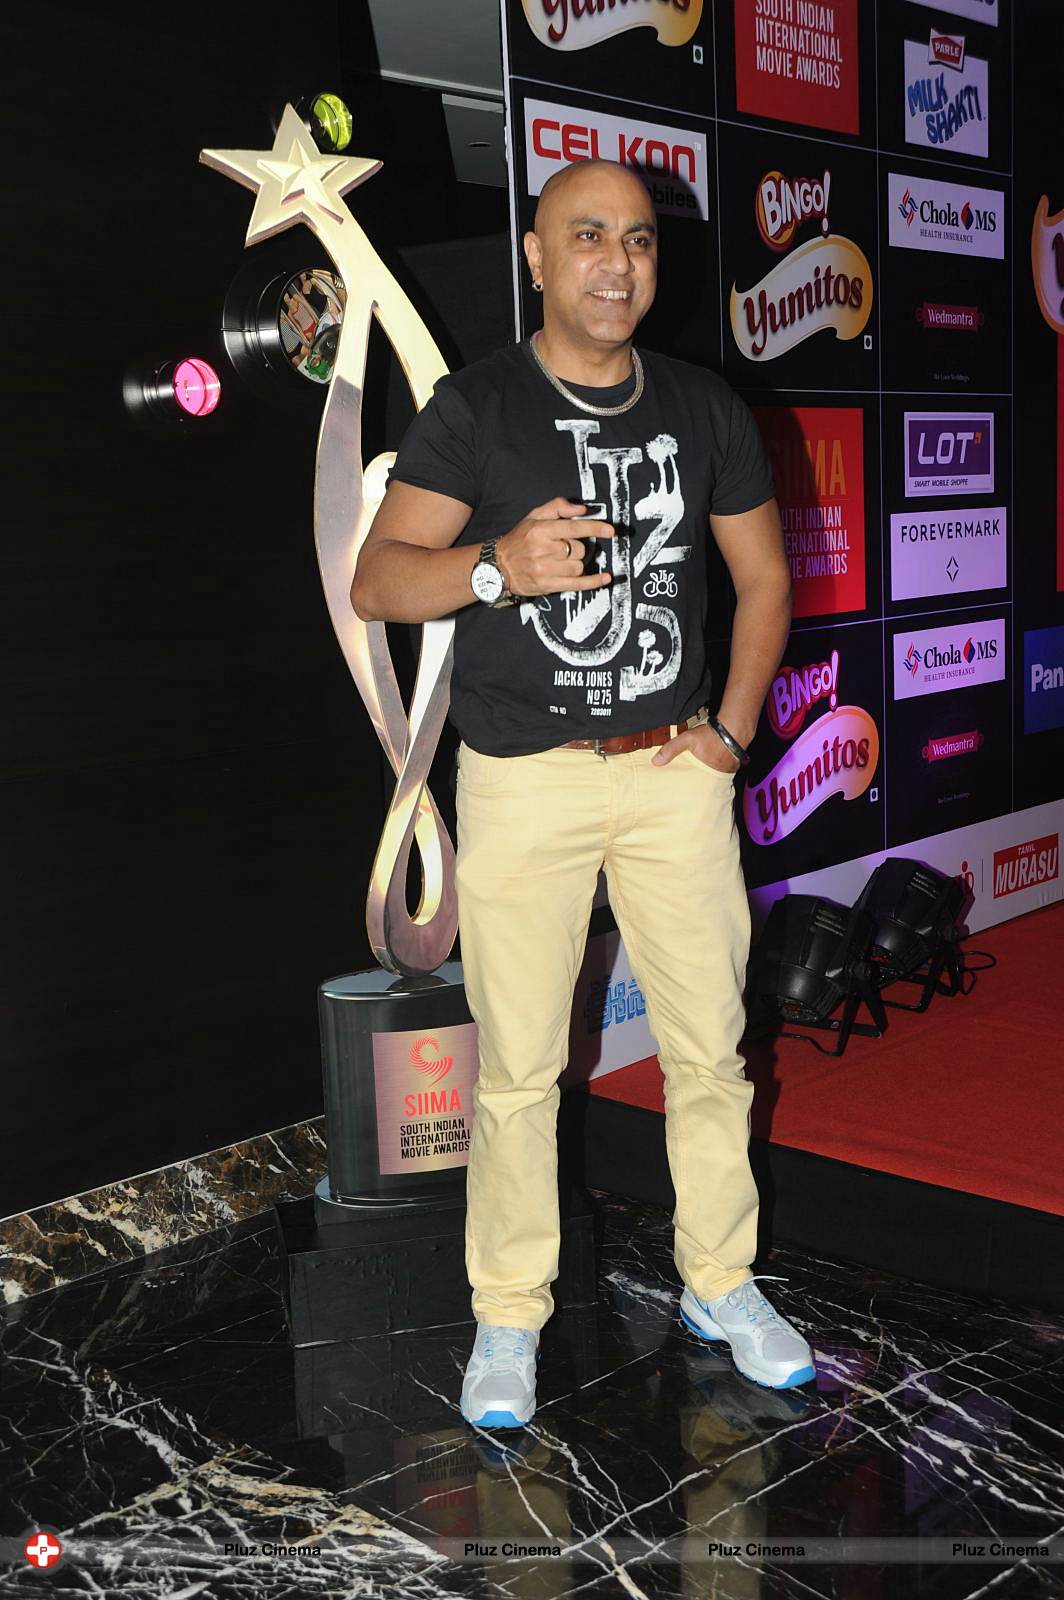 Baba Sehgal - Celebs at SIIMA Awards 2013 Pre Party Event Photos | Picture 563531